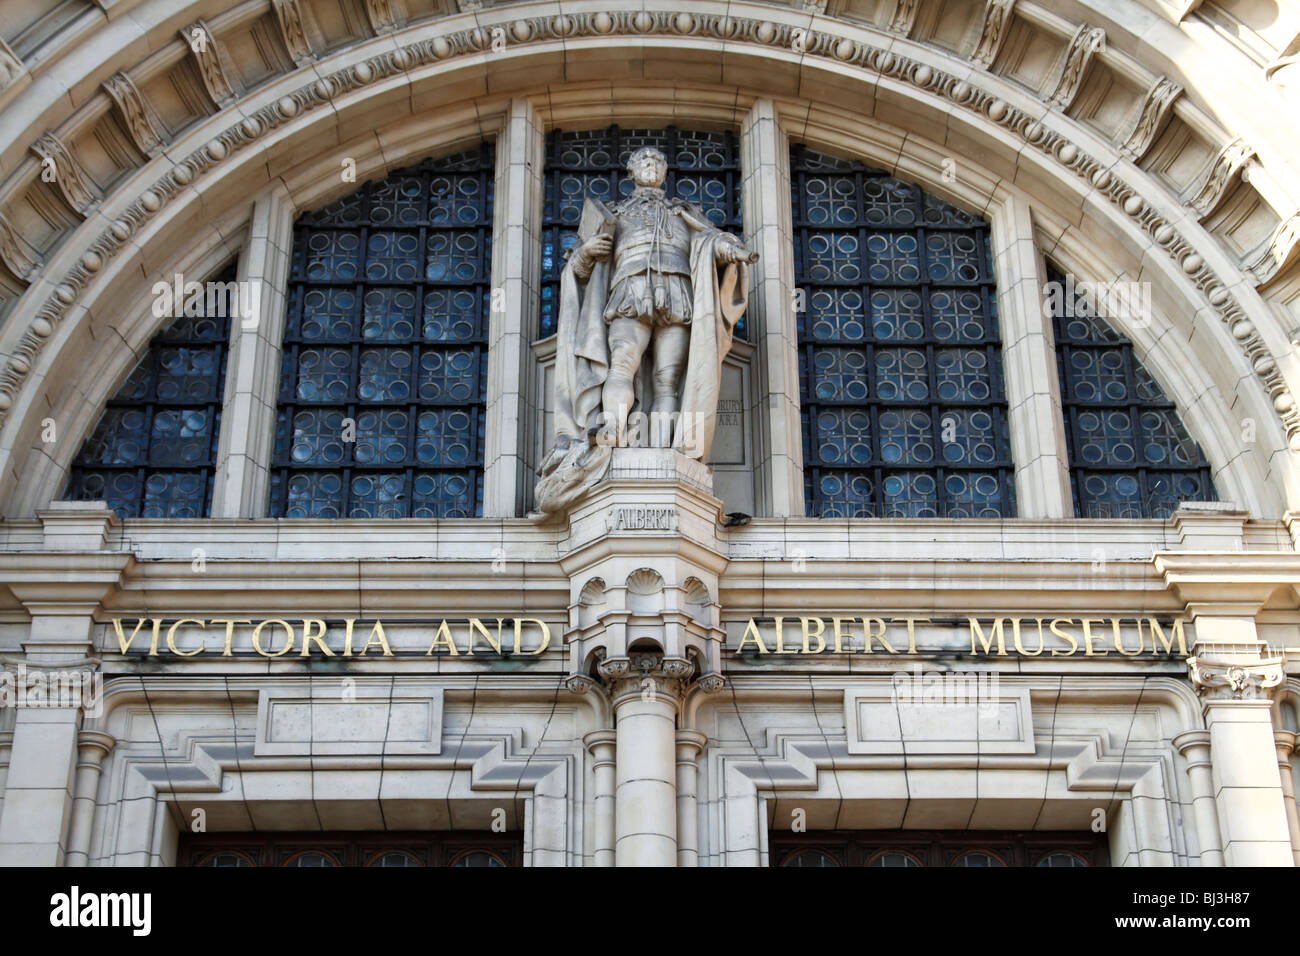 The entrance to the Victoria and Albert Museum, London Stock Photo